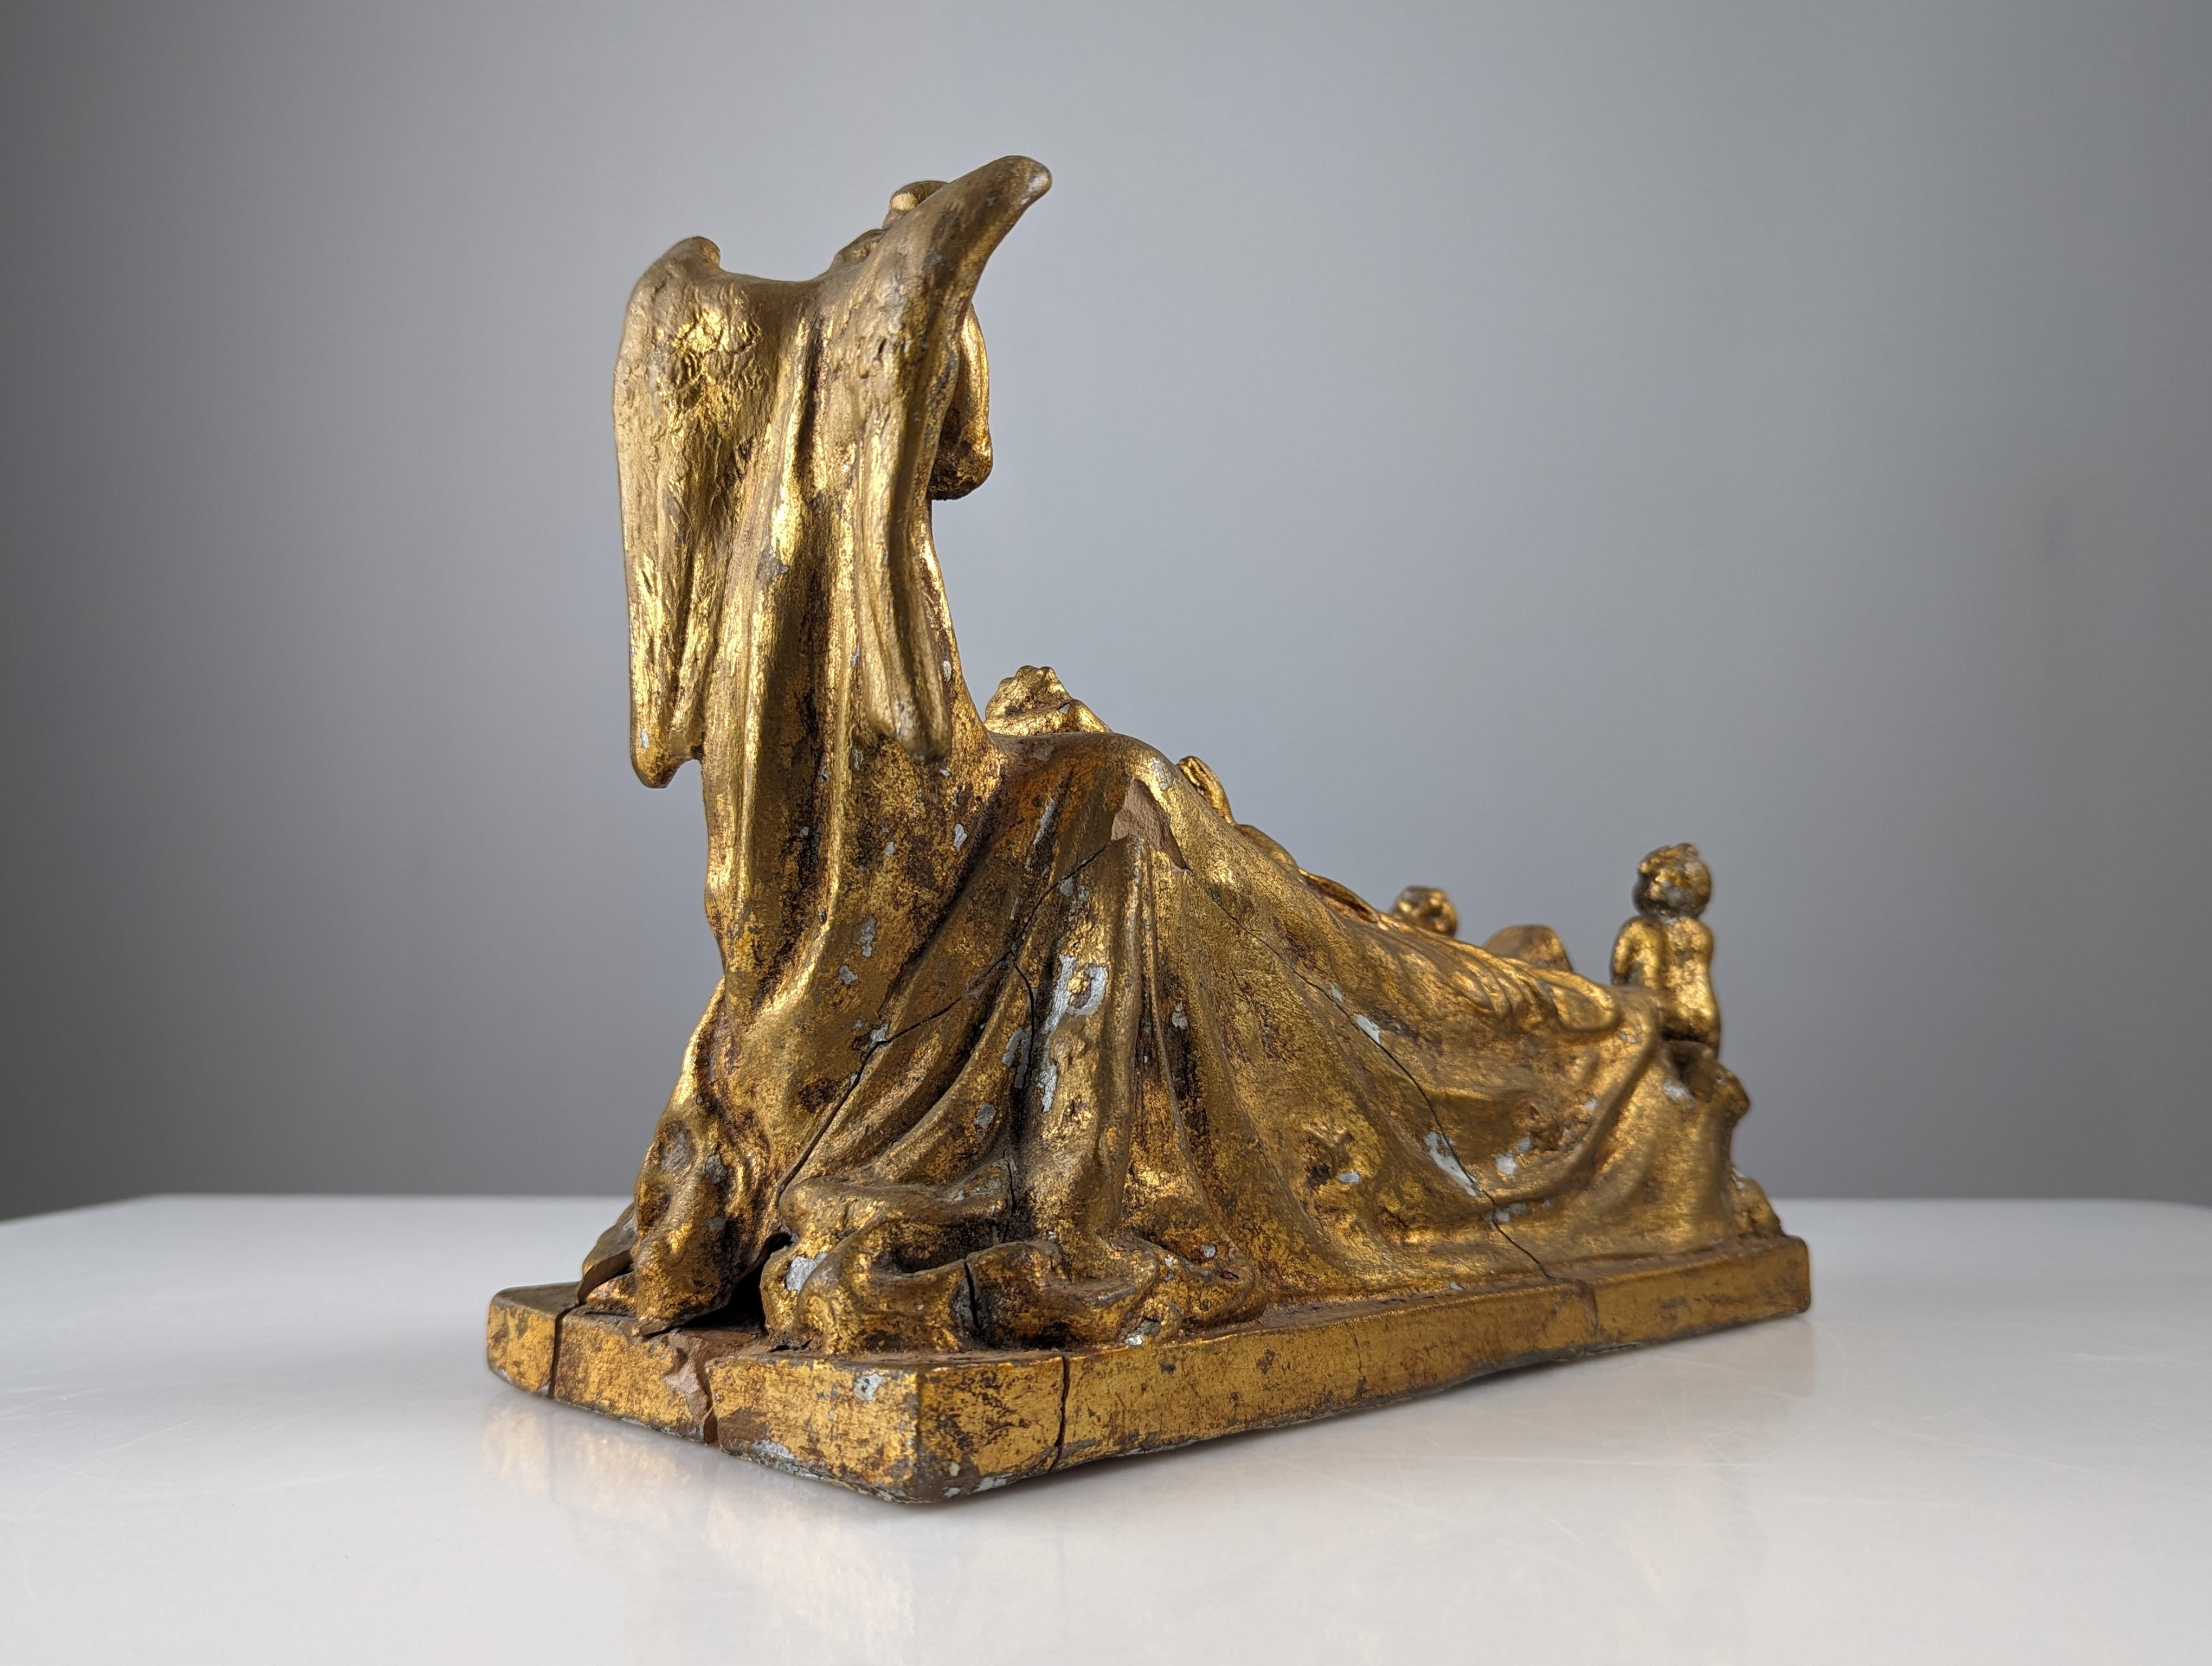 Beautiful sculpture made of gold-patinated terracotta representing a Queen praying accompanied by two cherubs at her feet and an Angel behind her. A piece with a lot of symbolism that transmits emotions.